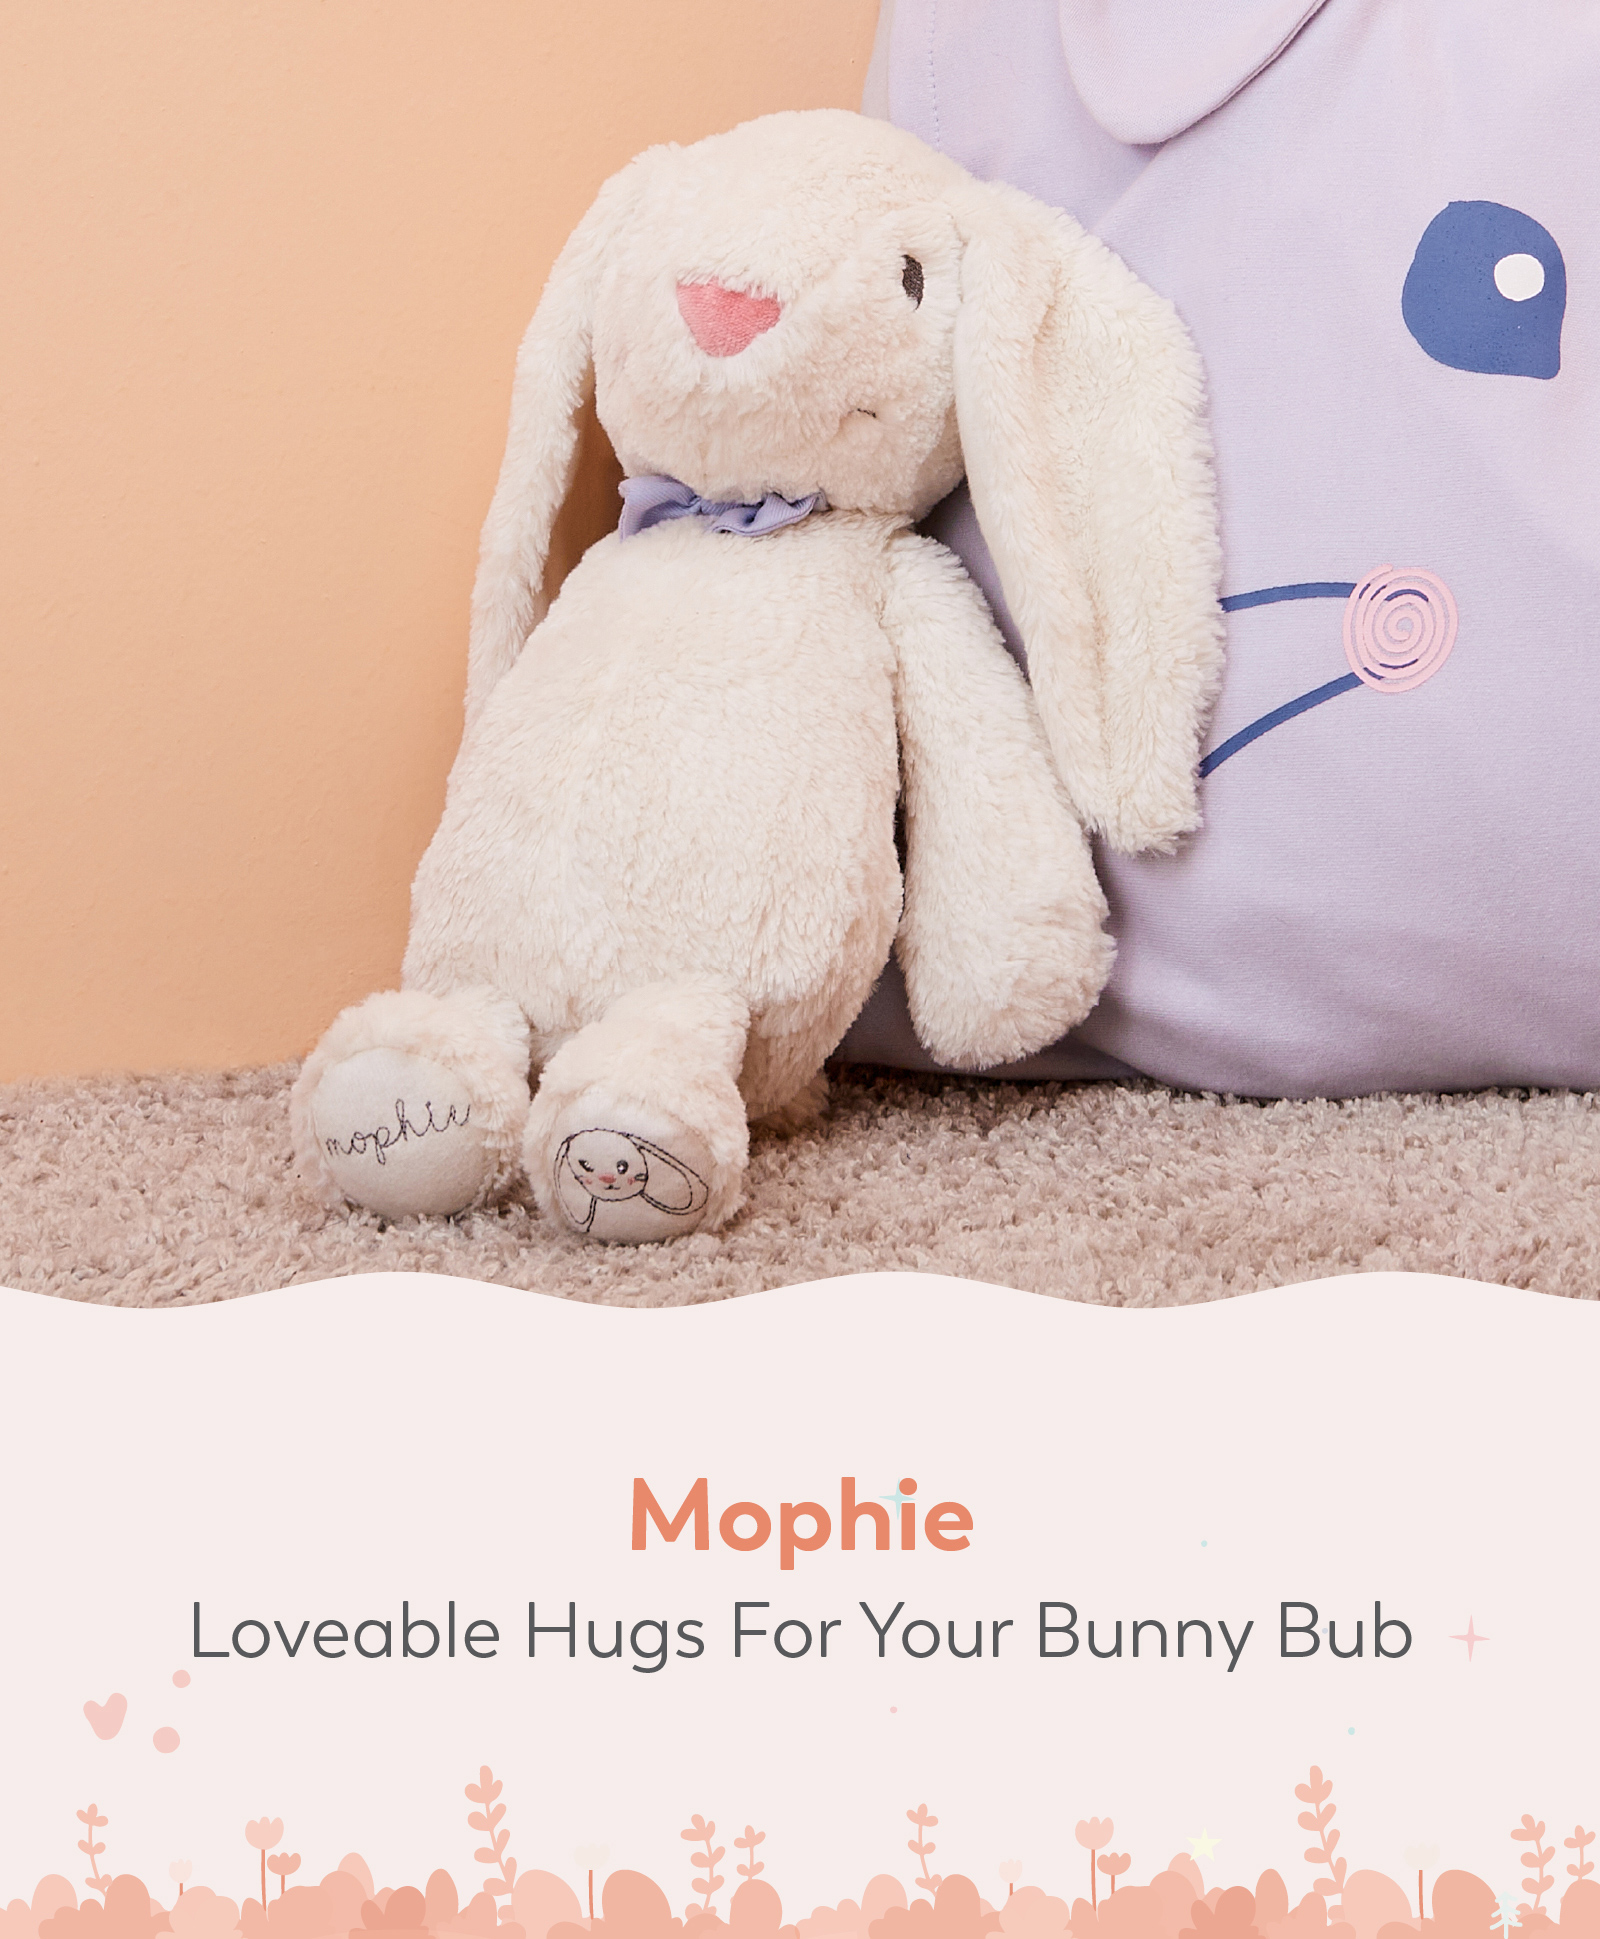 Mi Arcus Mophie Bunny Soft Toy White - Height 30 cm Online India, Buy Soft  Toys for (0 Month-4 Years) at  - 11206511